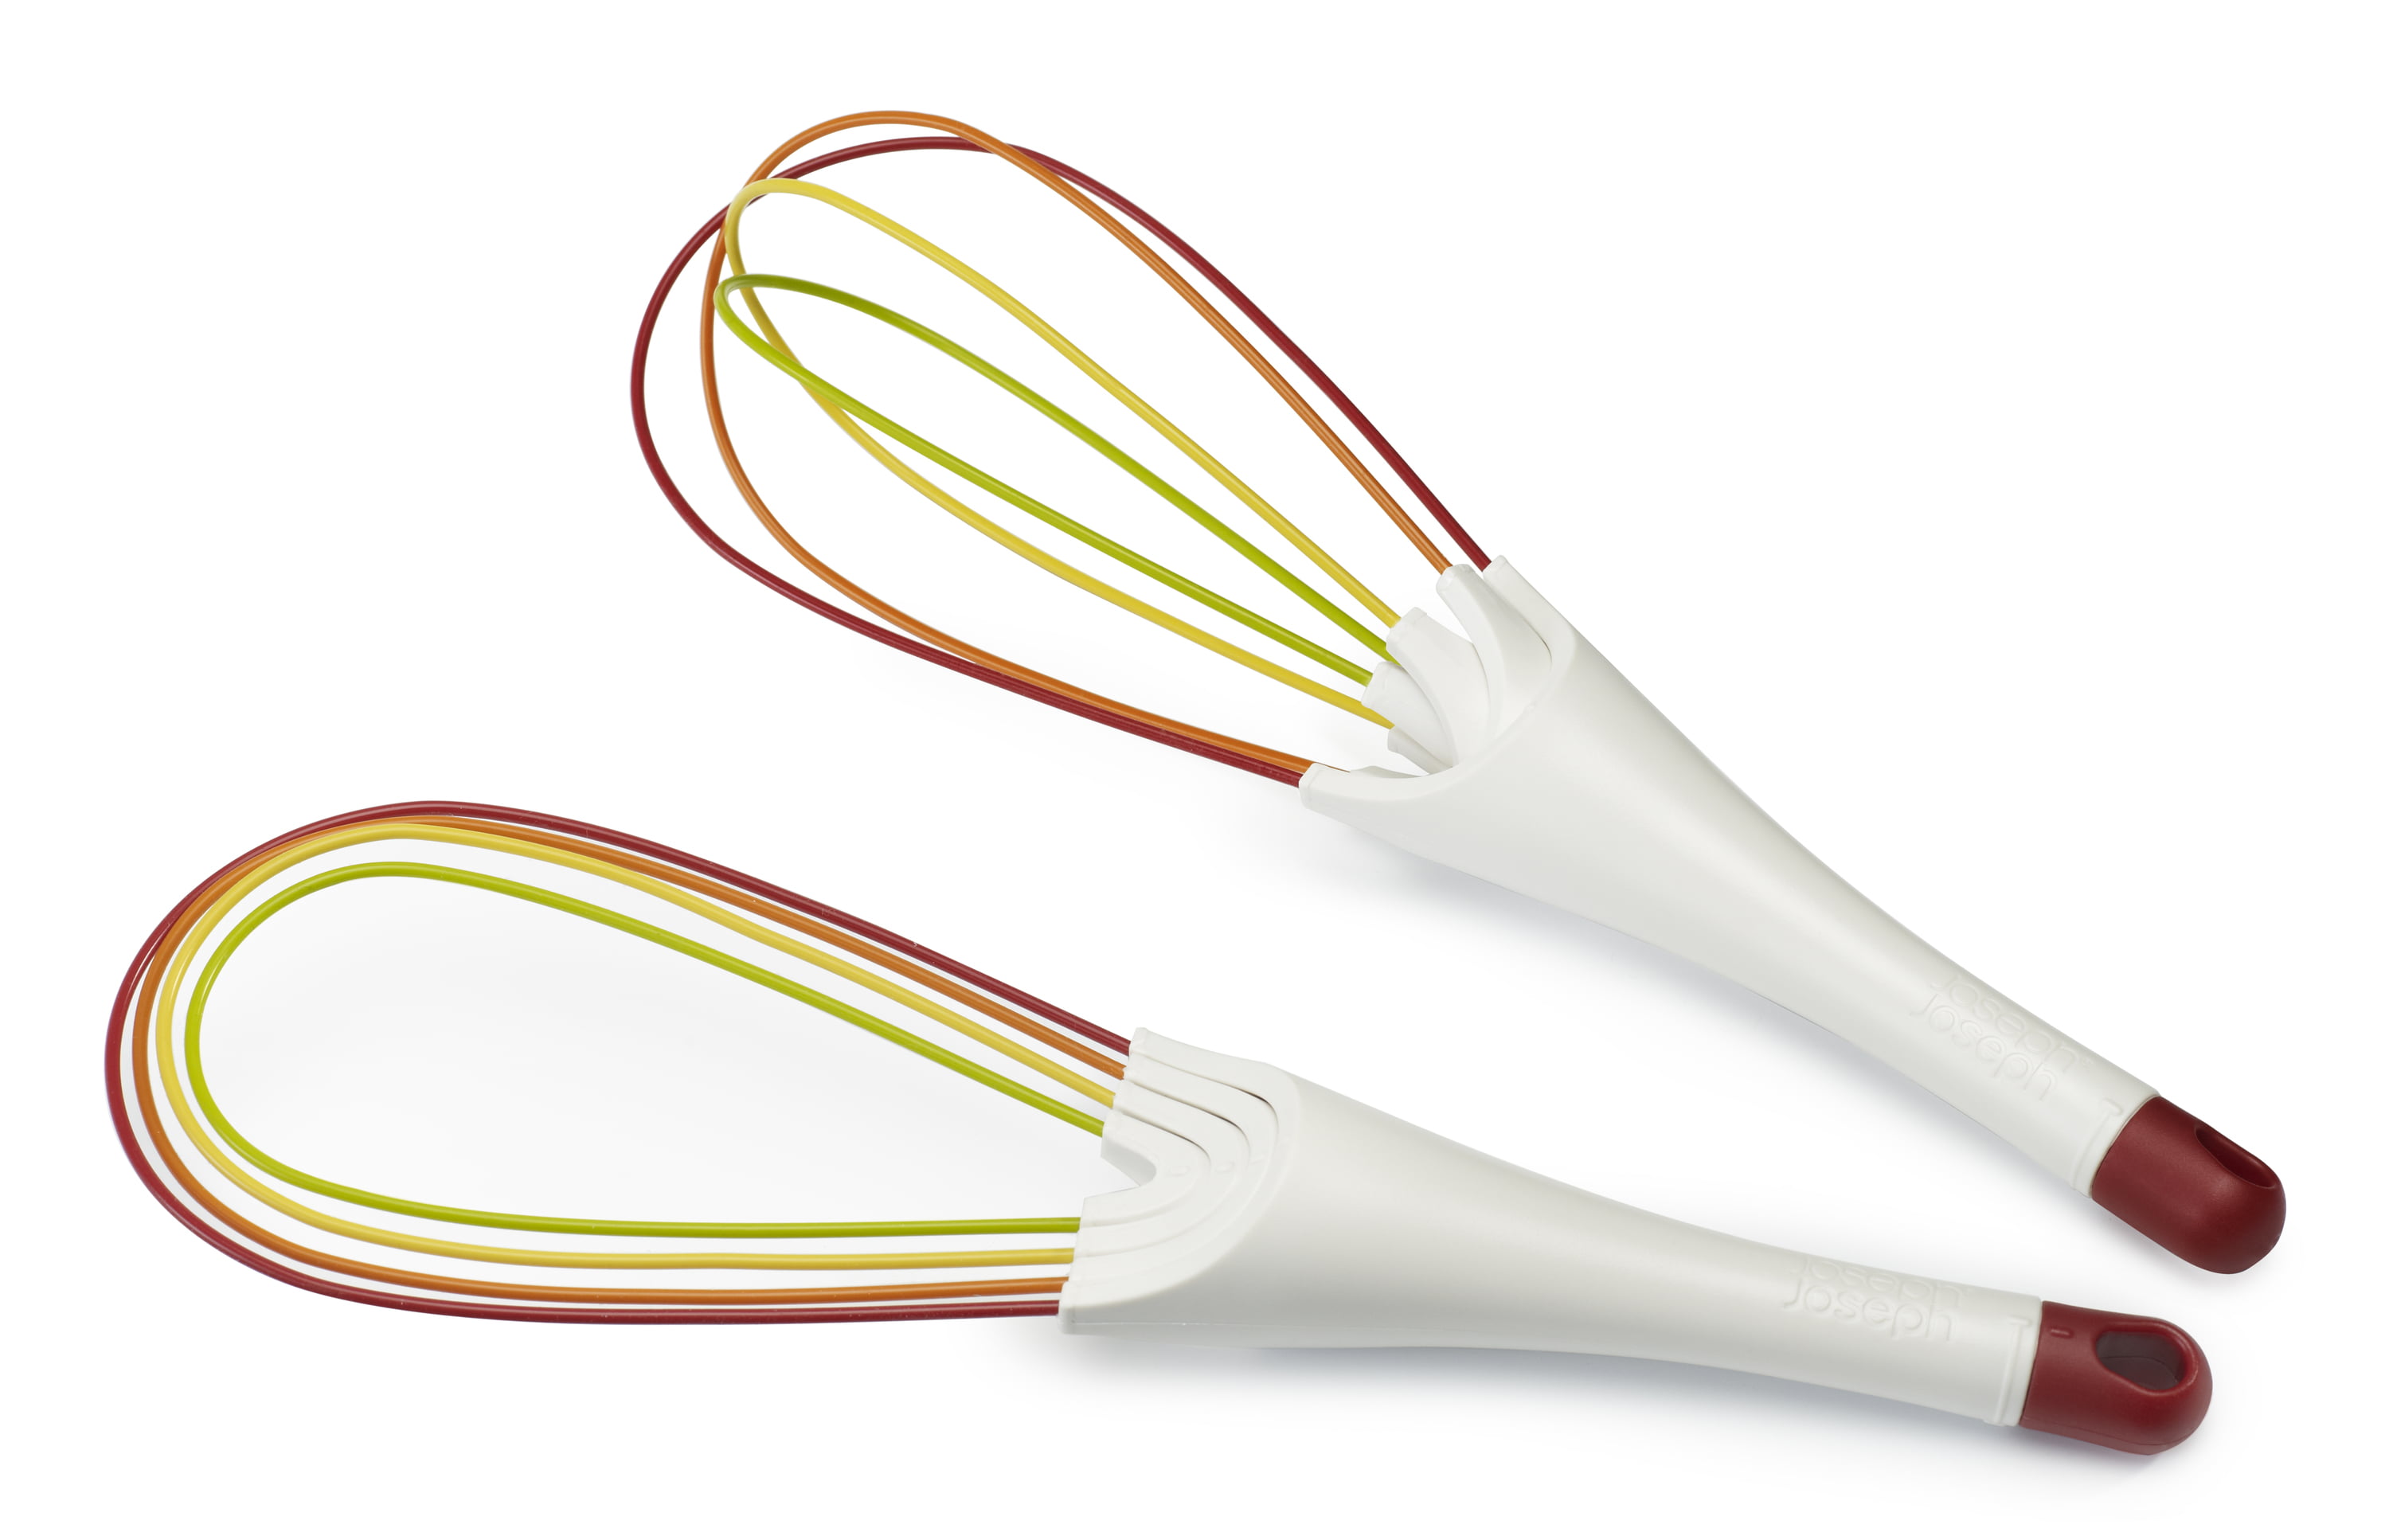 Joseph Joseph 20073 Twist Whisk 2-in-1 Balloon and Flat Whisk Silicone  Coated Steel Wire, 11.5-Inch, Multicolored 